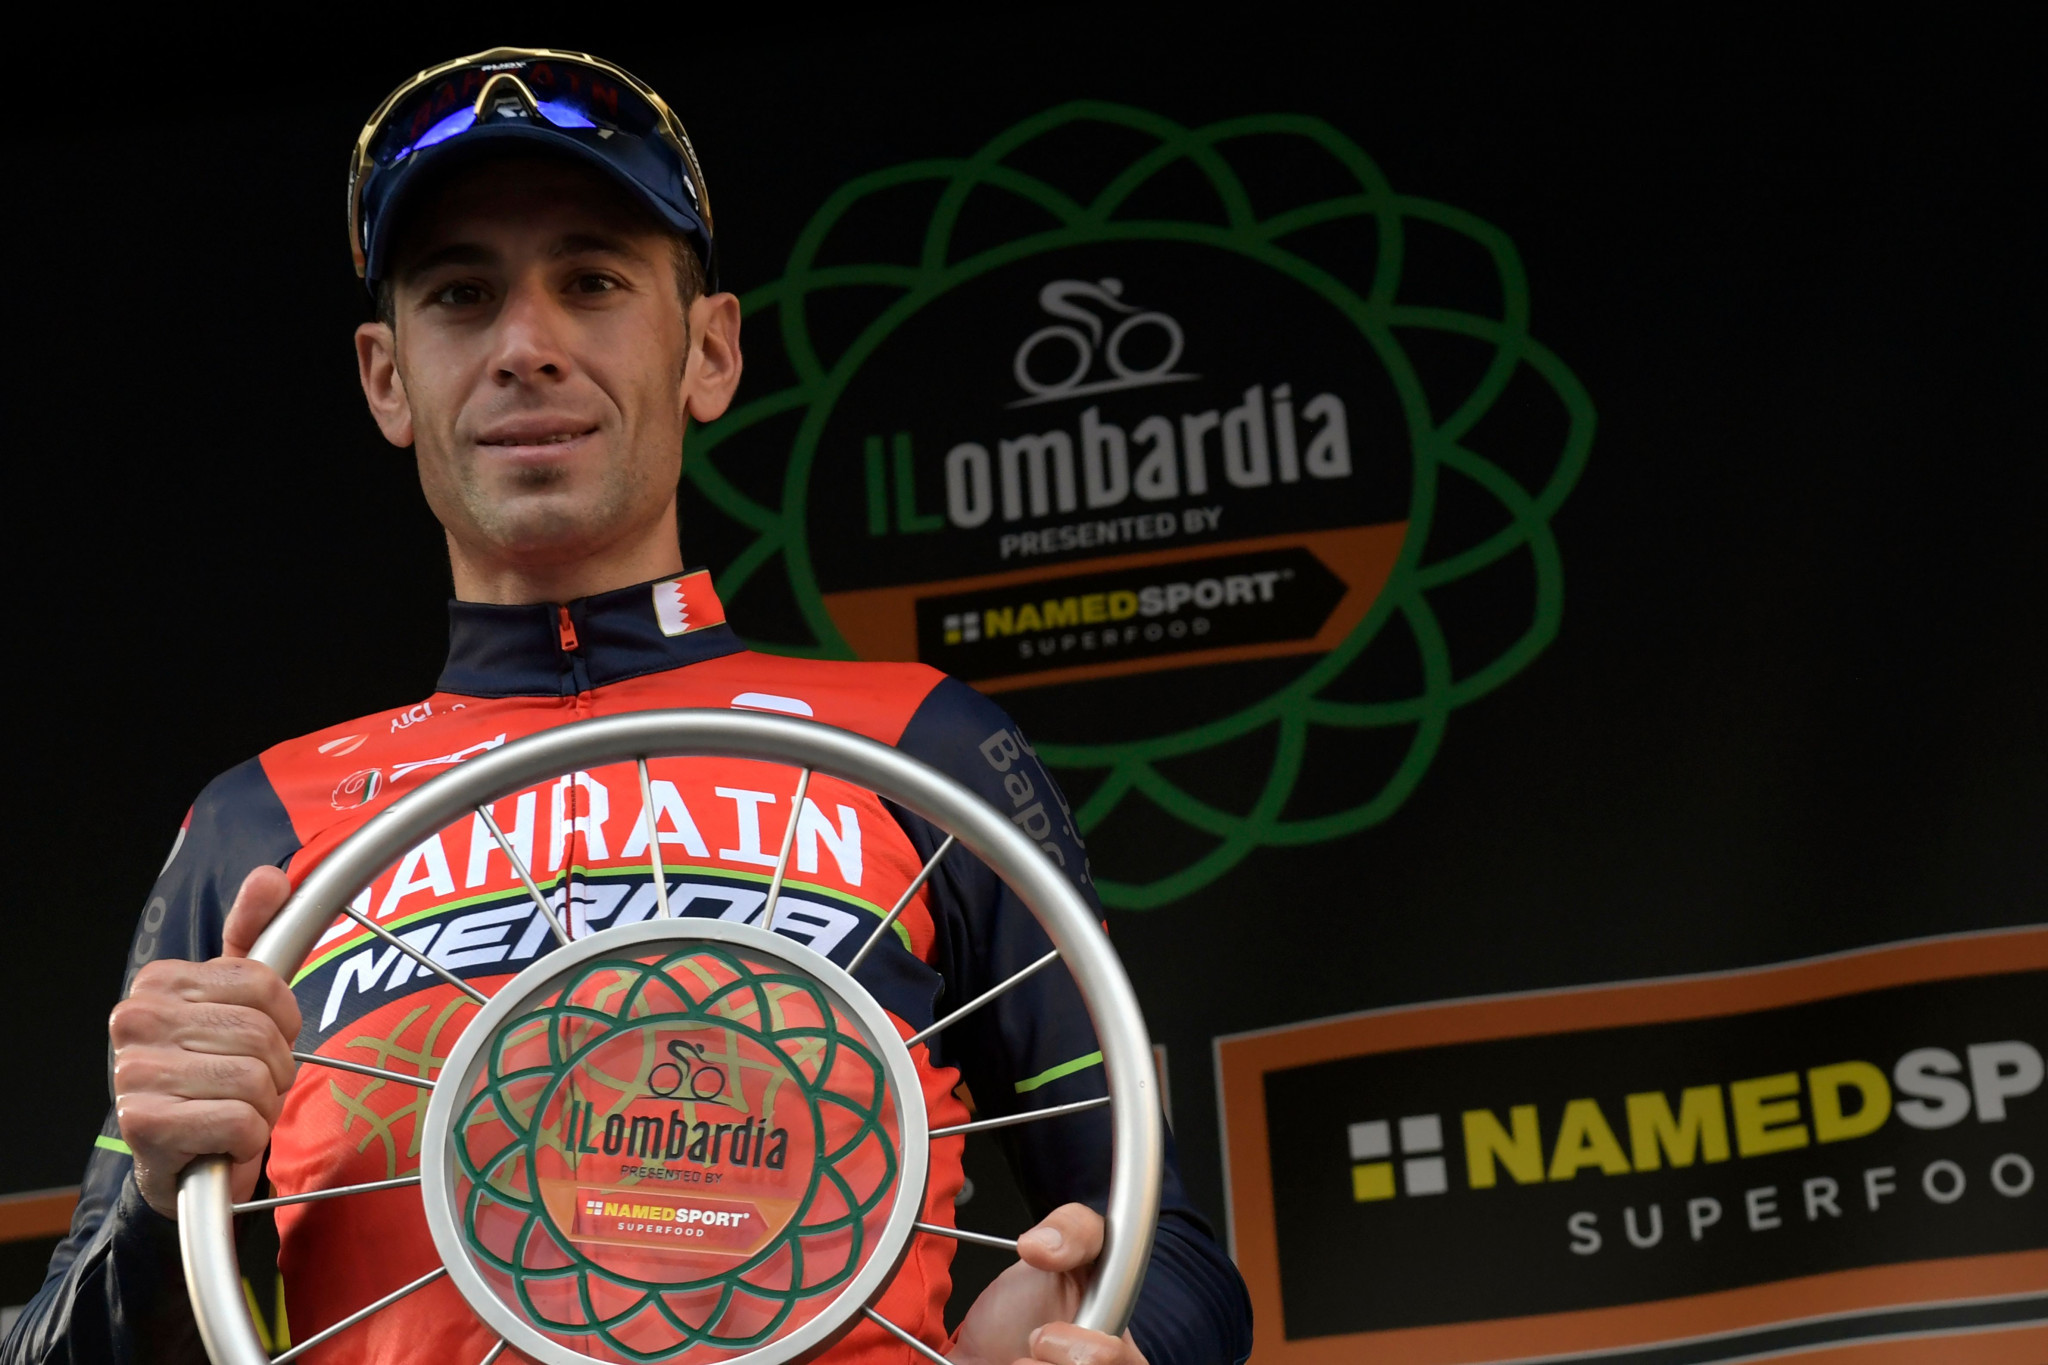 Nibali claims "no interest" in gaining Vuelta title if Froome is banned